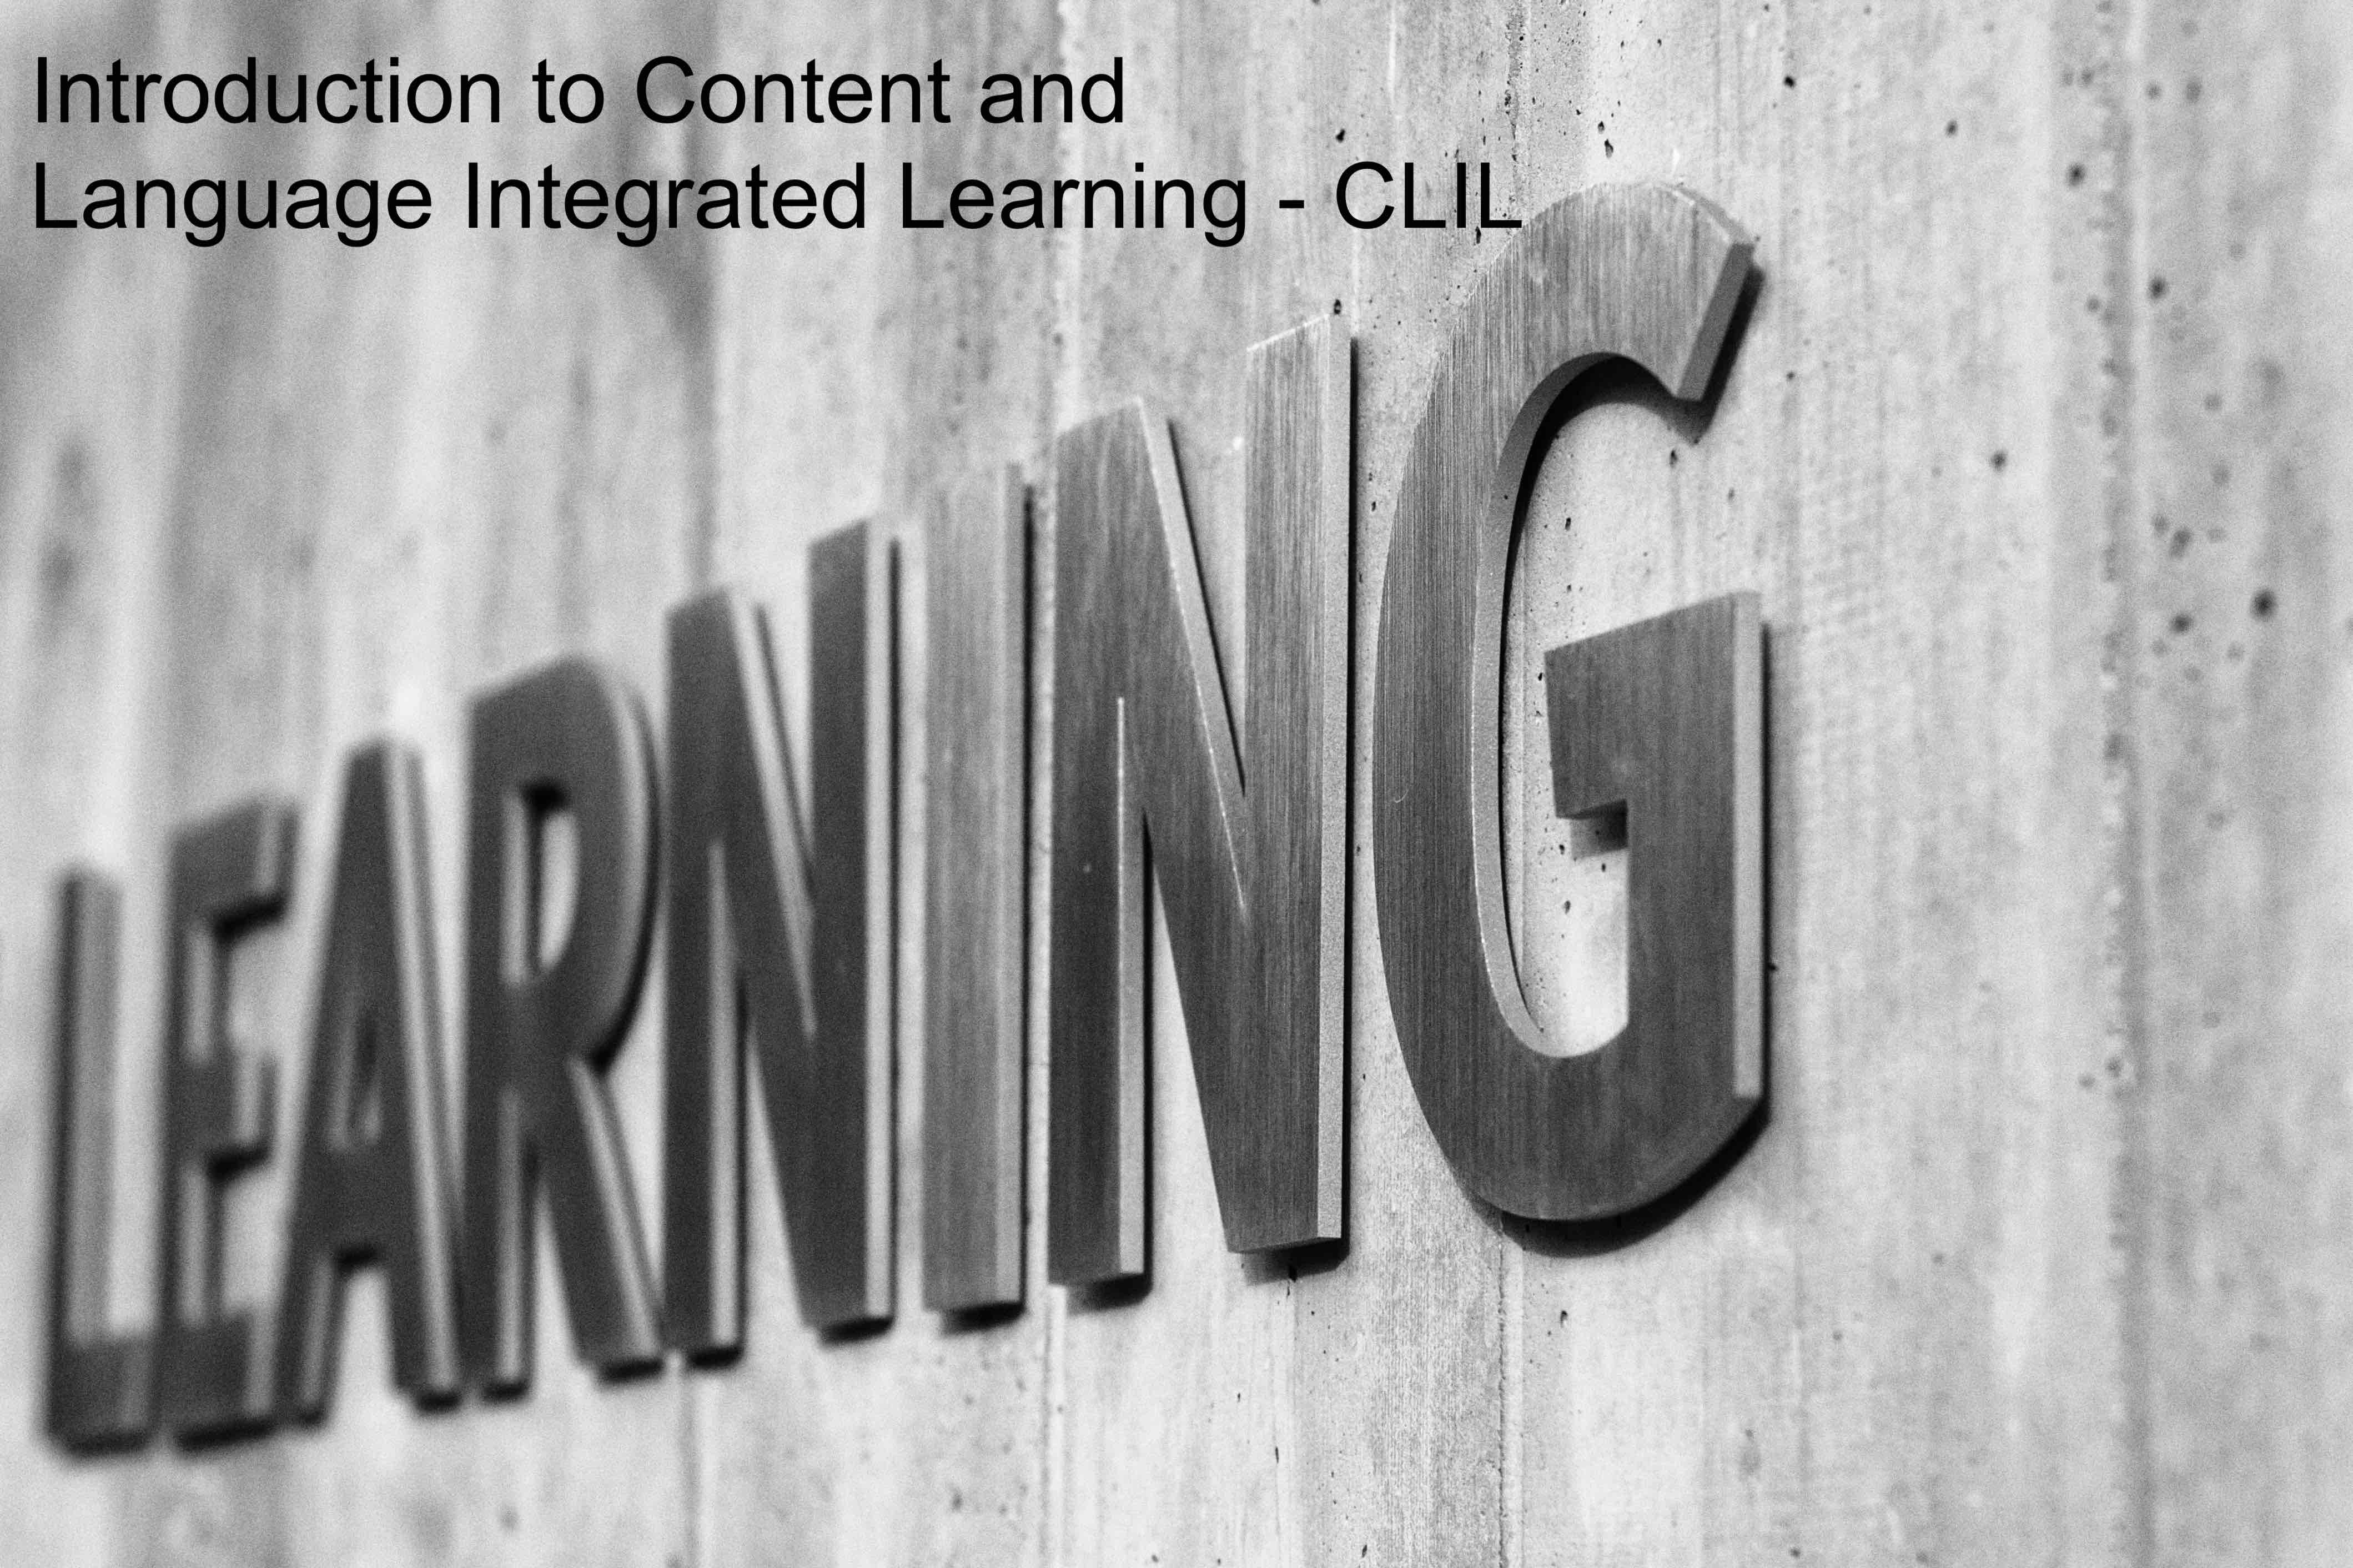 Introduction to Content and Language Integrated Learning - CLIL 2021